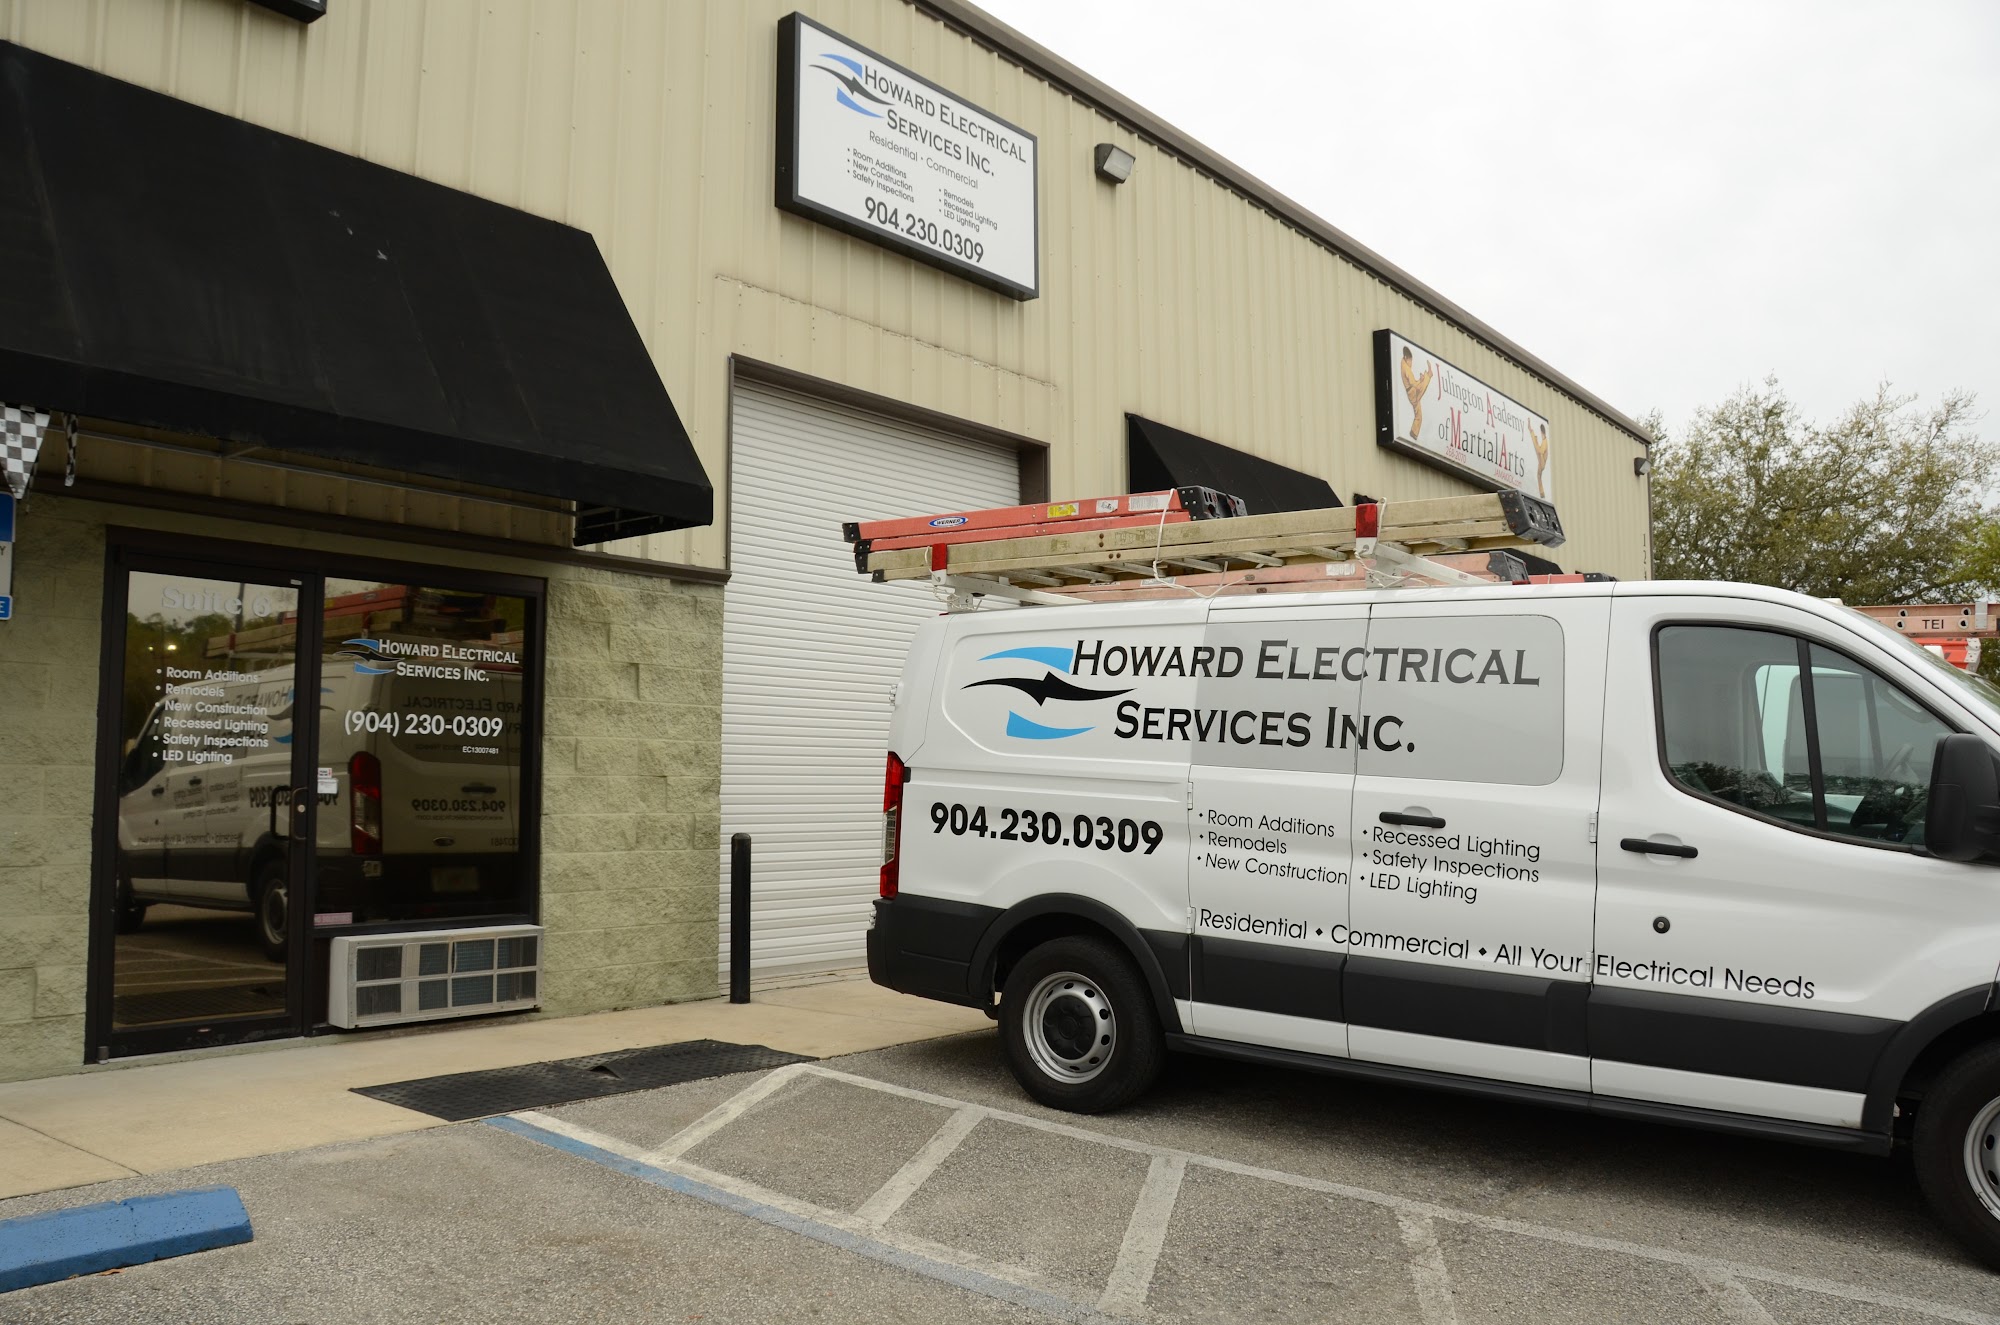 Howard Electrical Services Inc